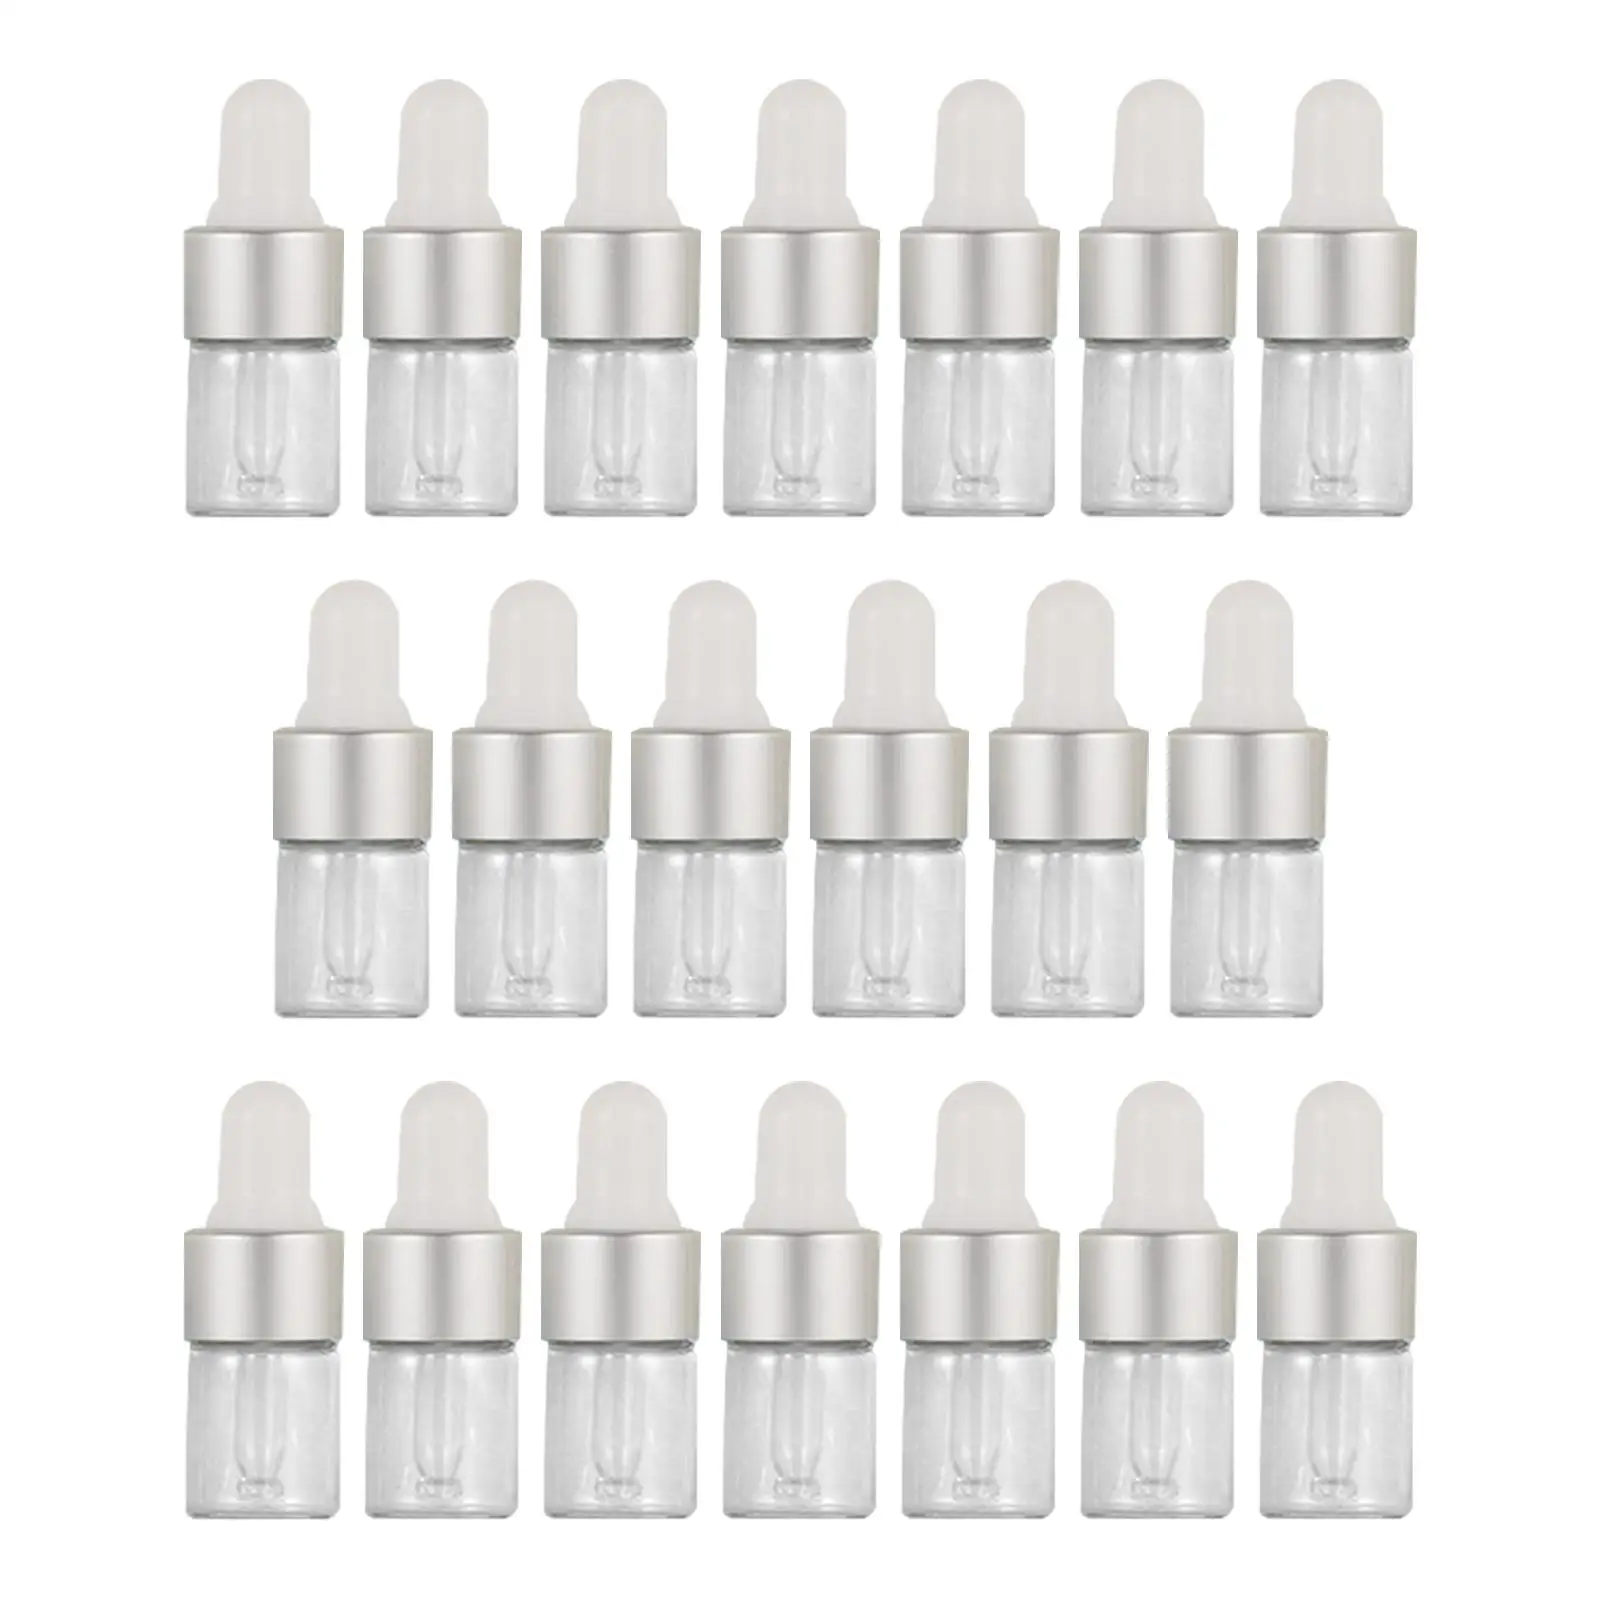 20 Pieces glass Dropper Bottles with Glass Eye Droppers Containers Travel Bottles Vials for Body Oils Perfume Oils Liquids